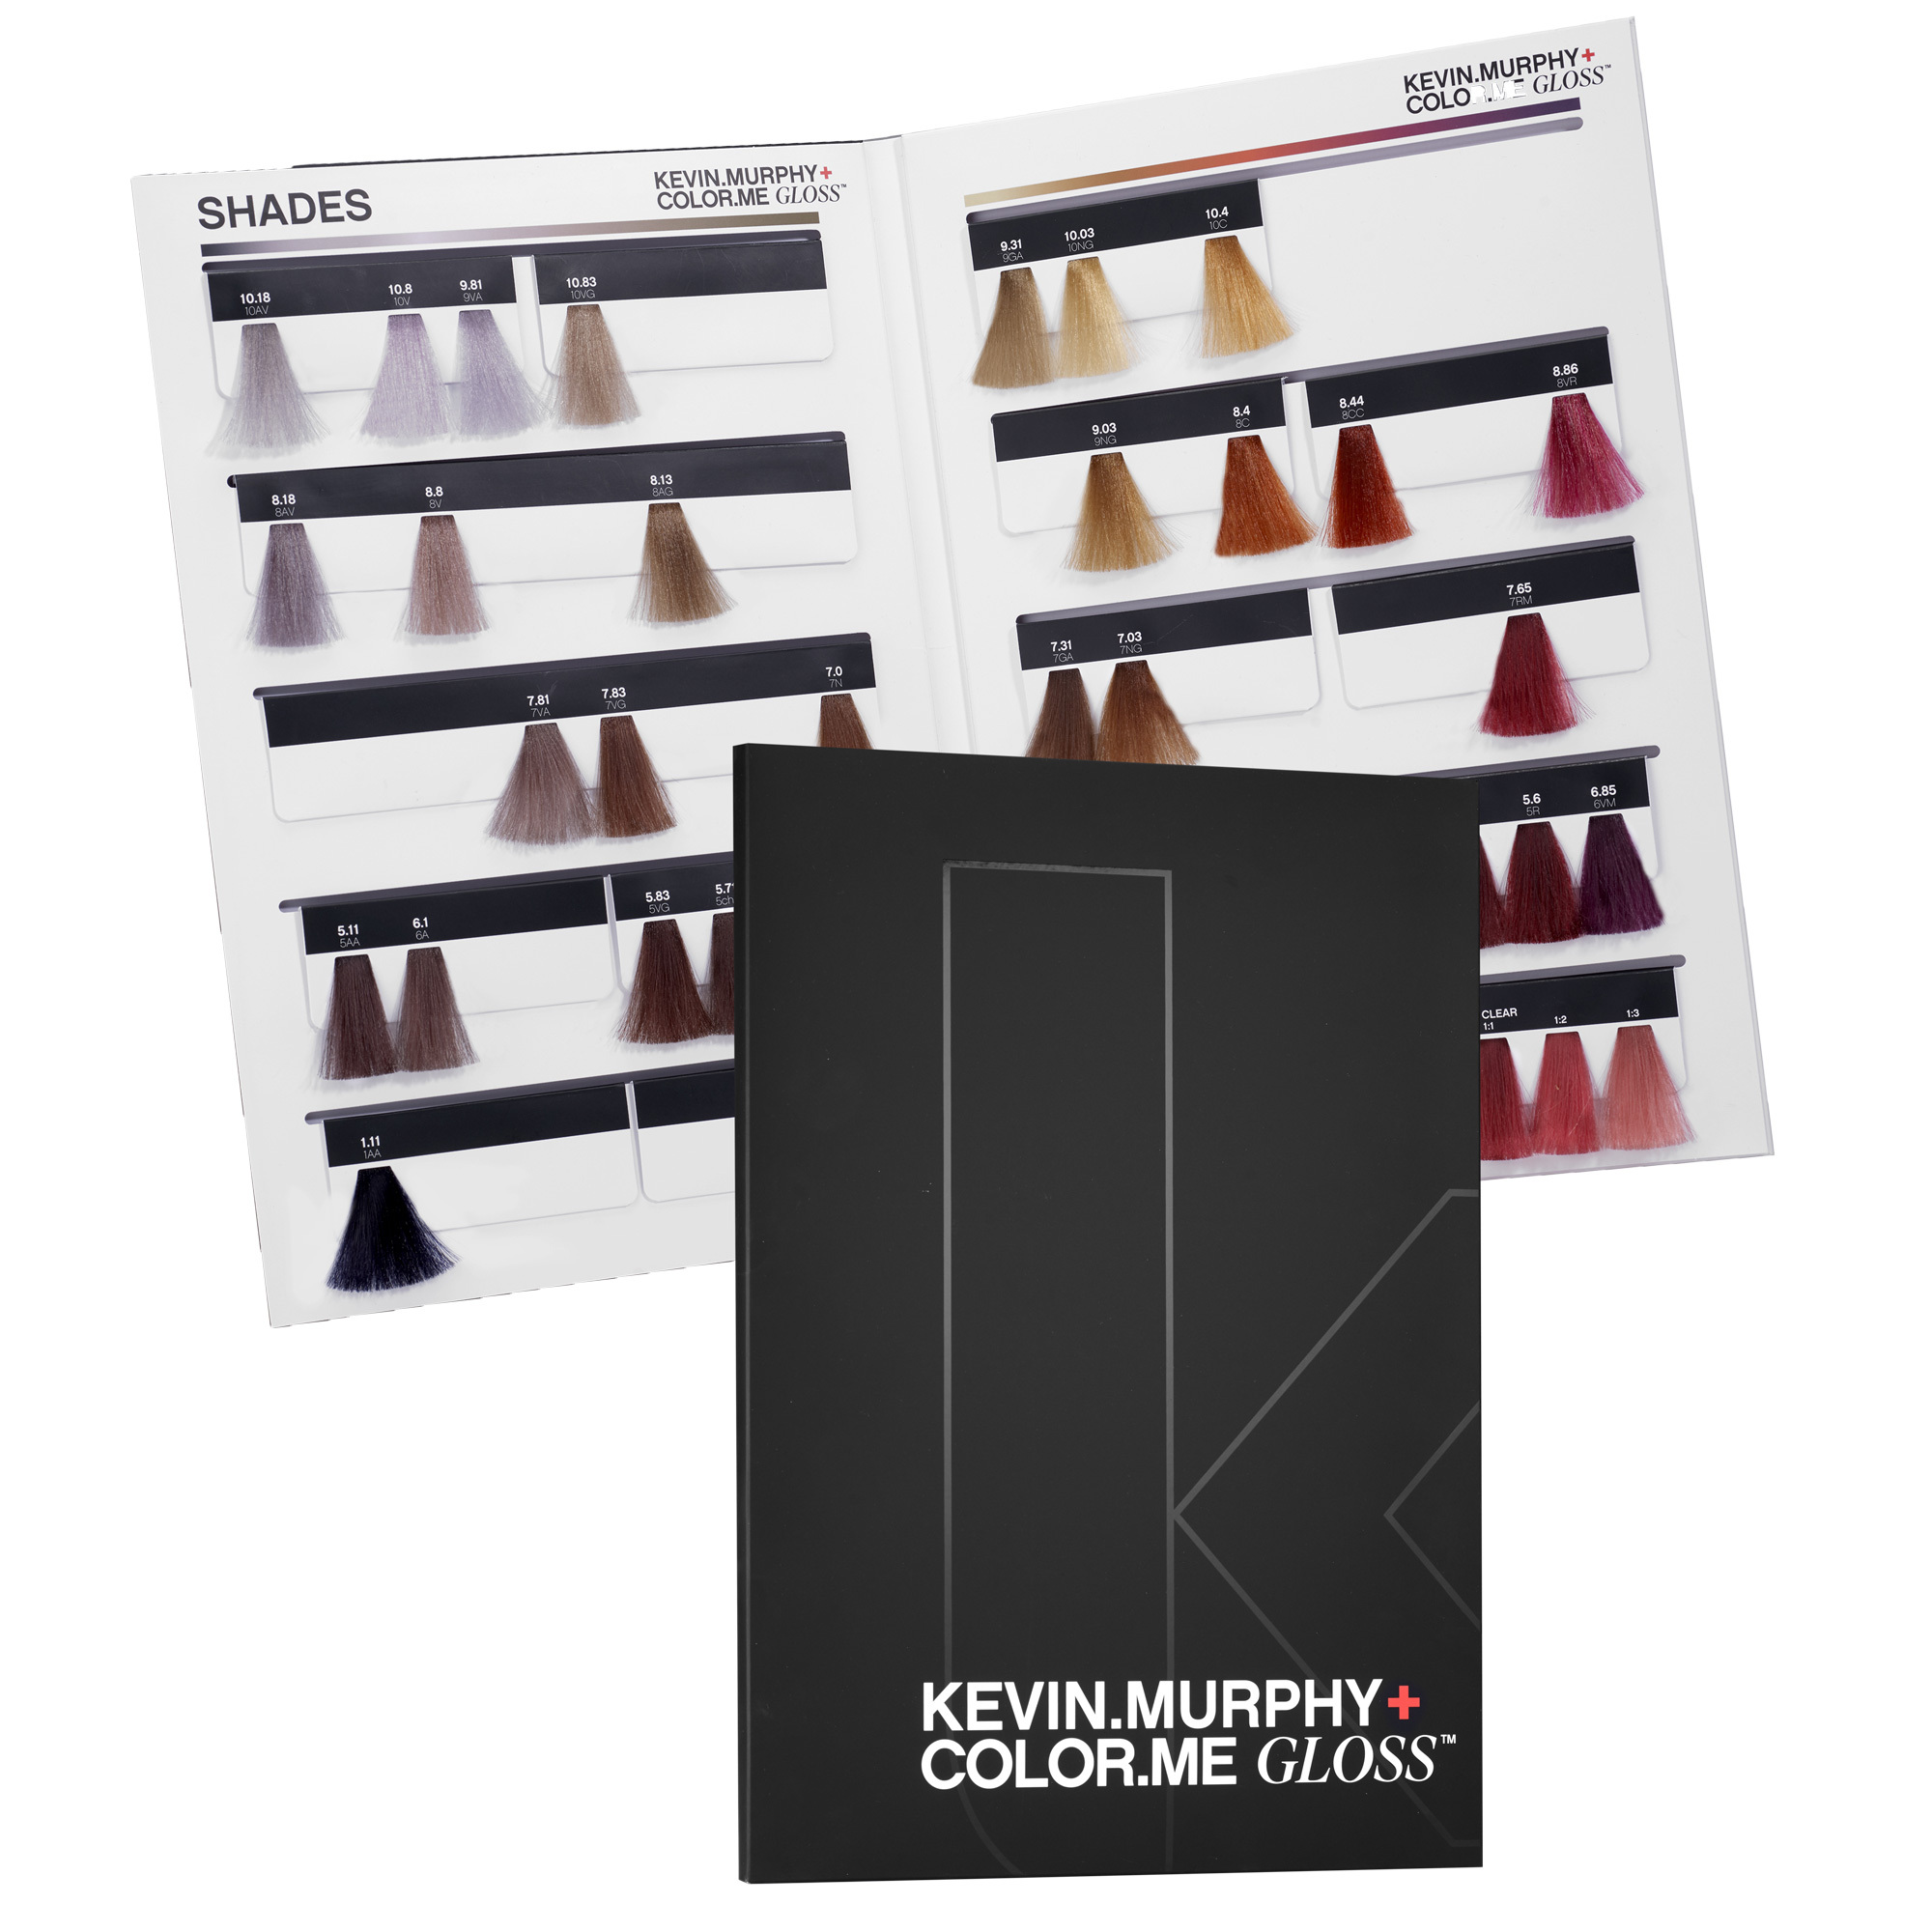 KEVIN.MURPHY COLOR.ME GLOSS Swatch Book